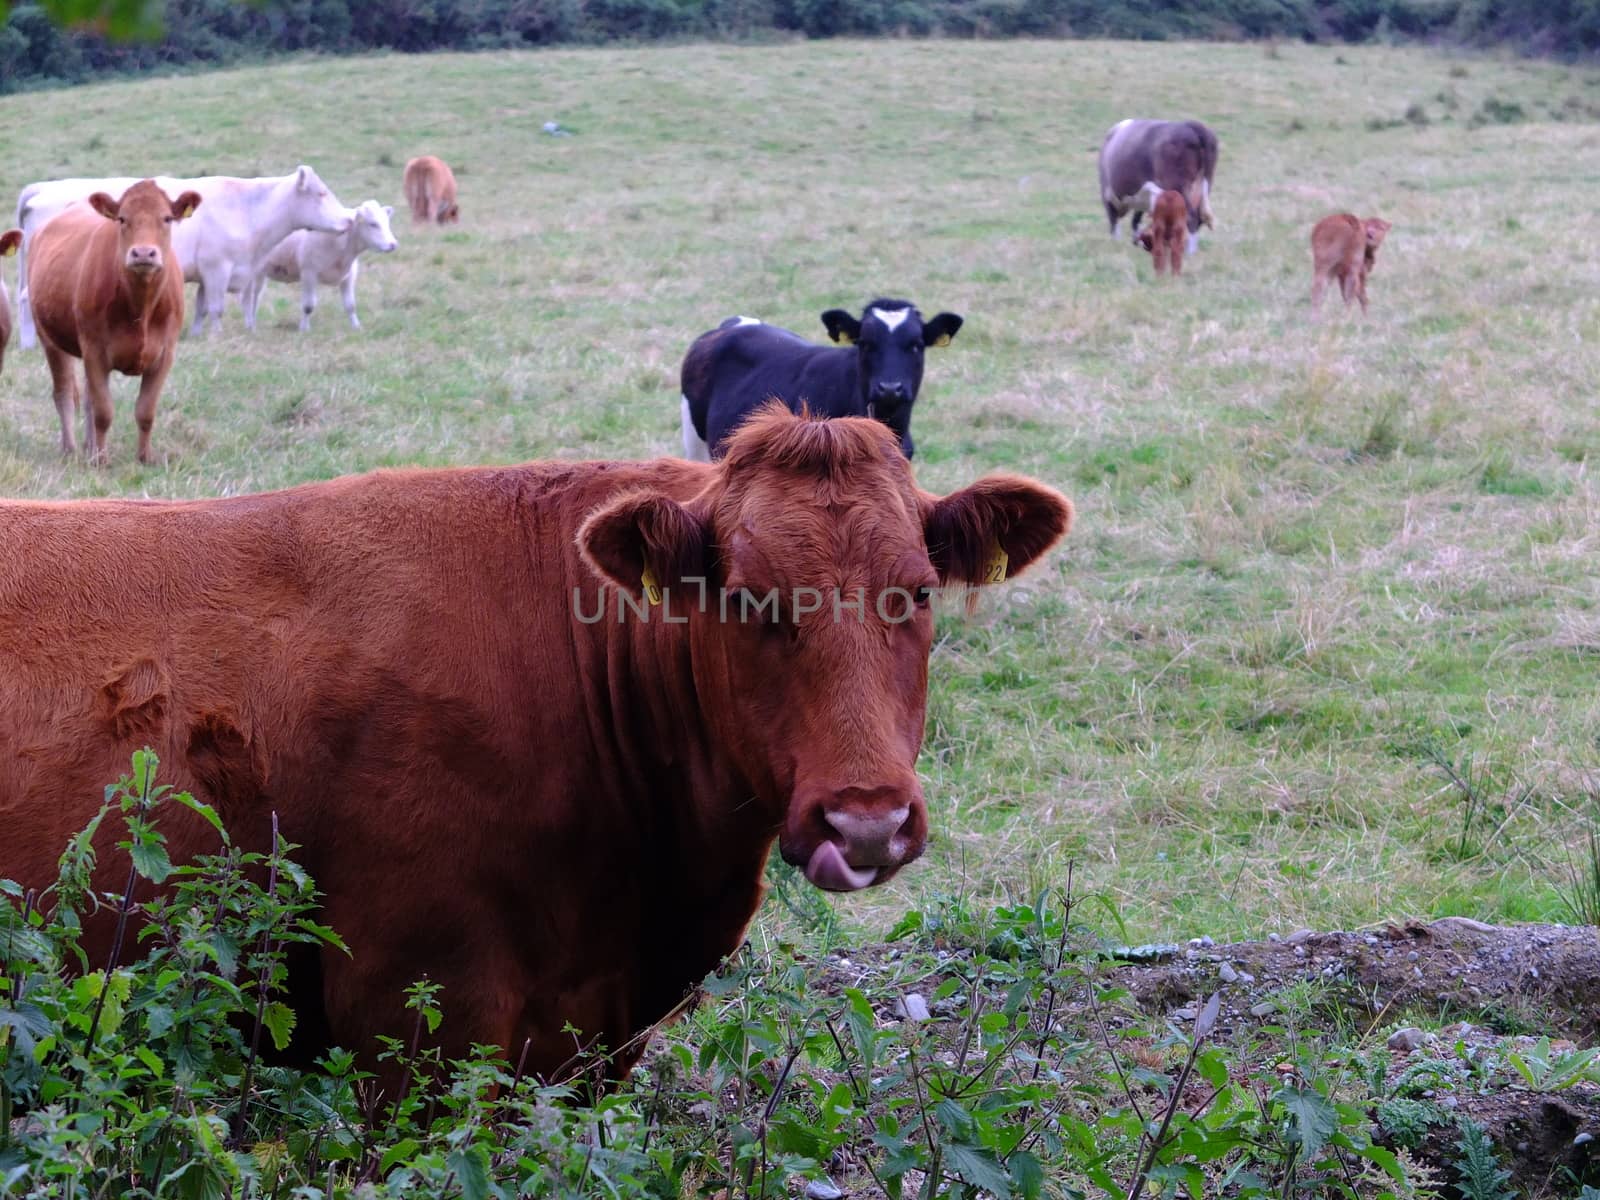 Cows and calves by antenacarnidlo